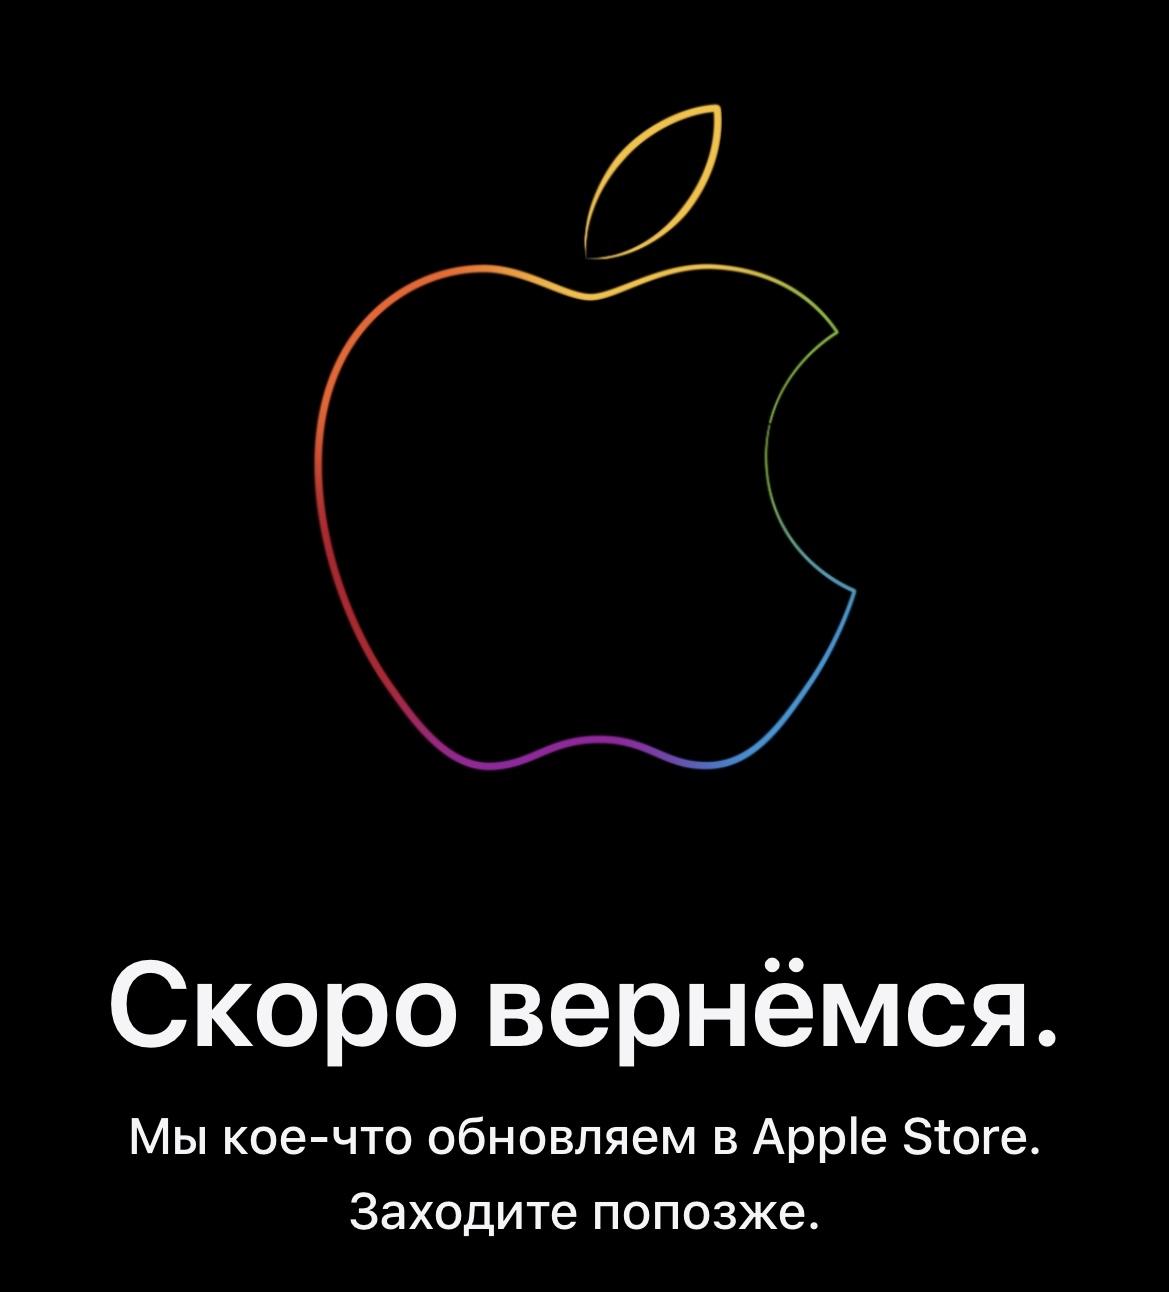 Apple online store closed to update